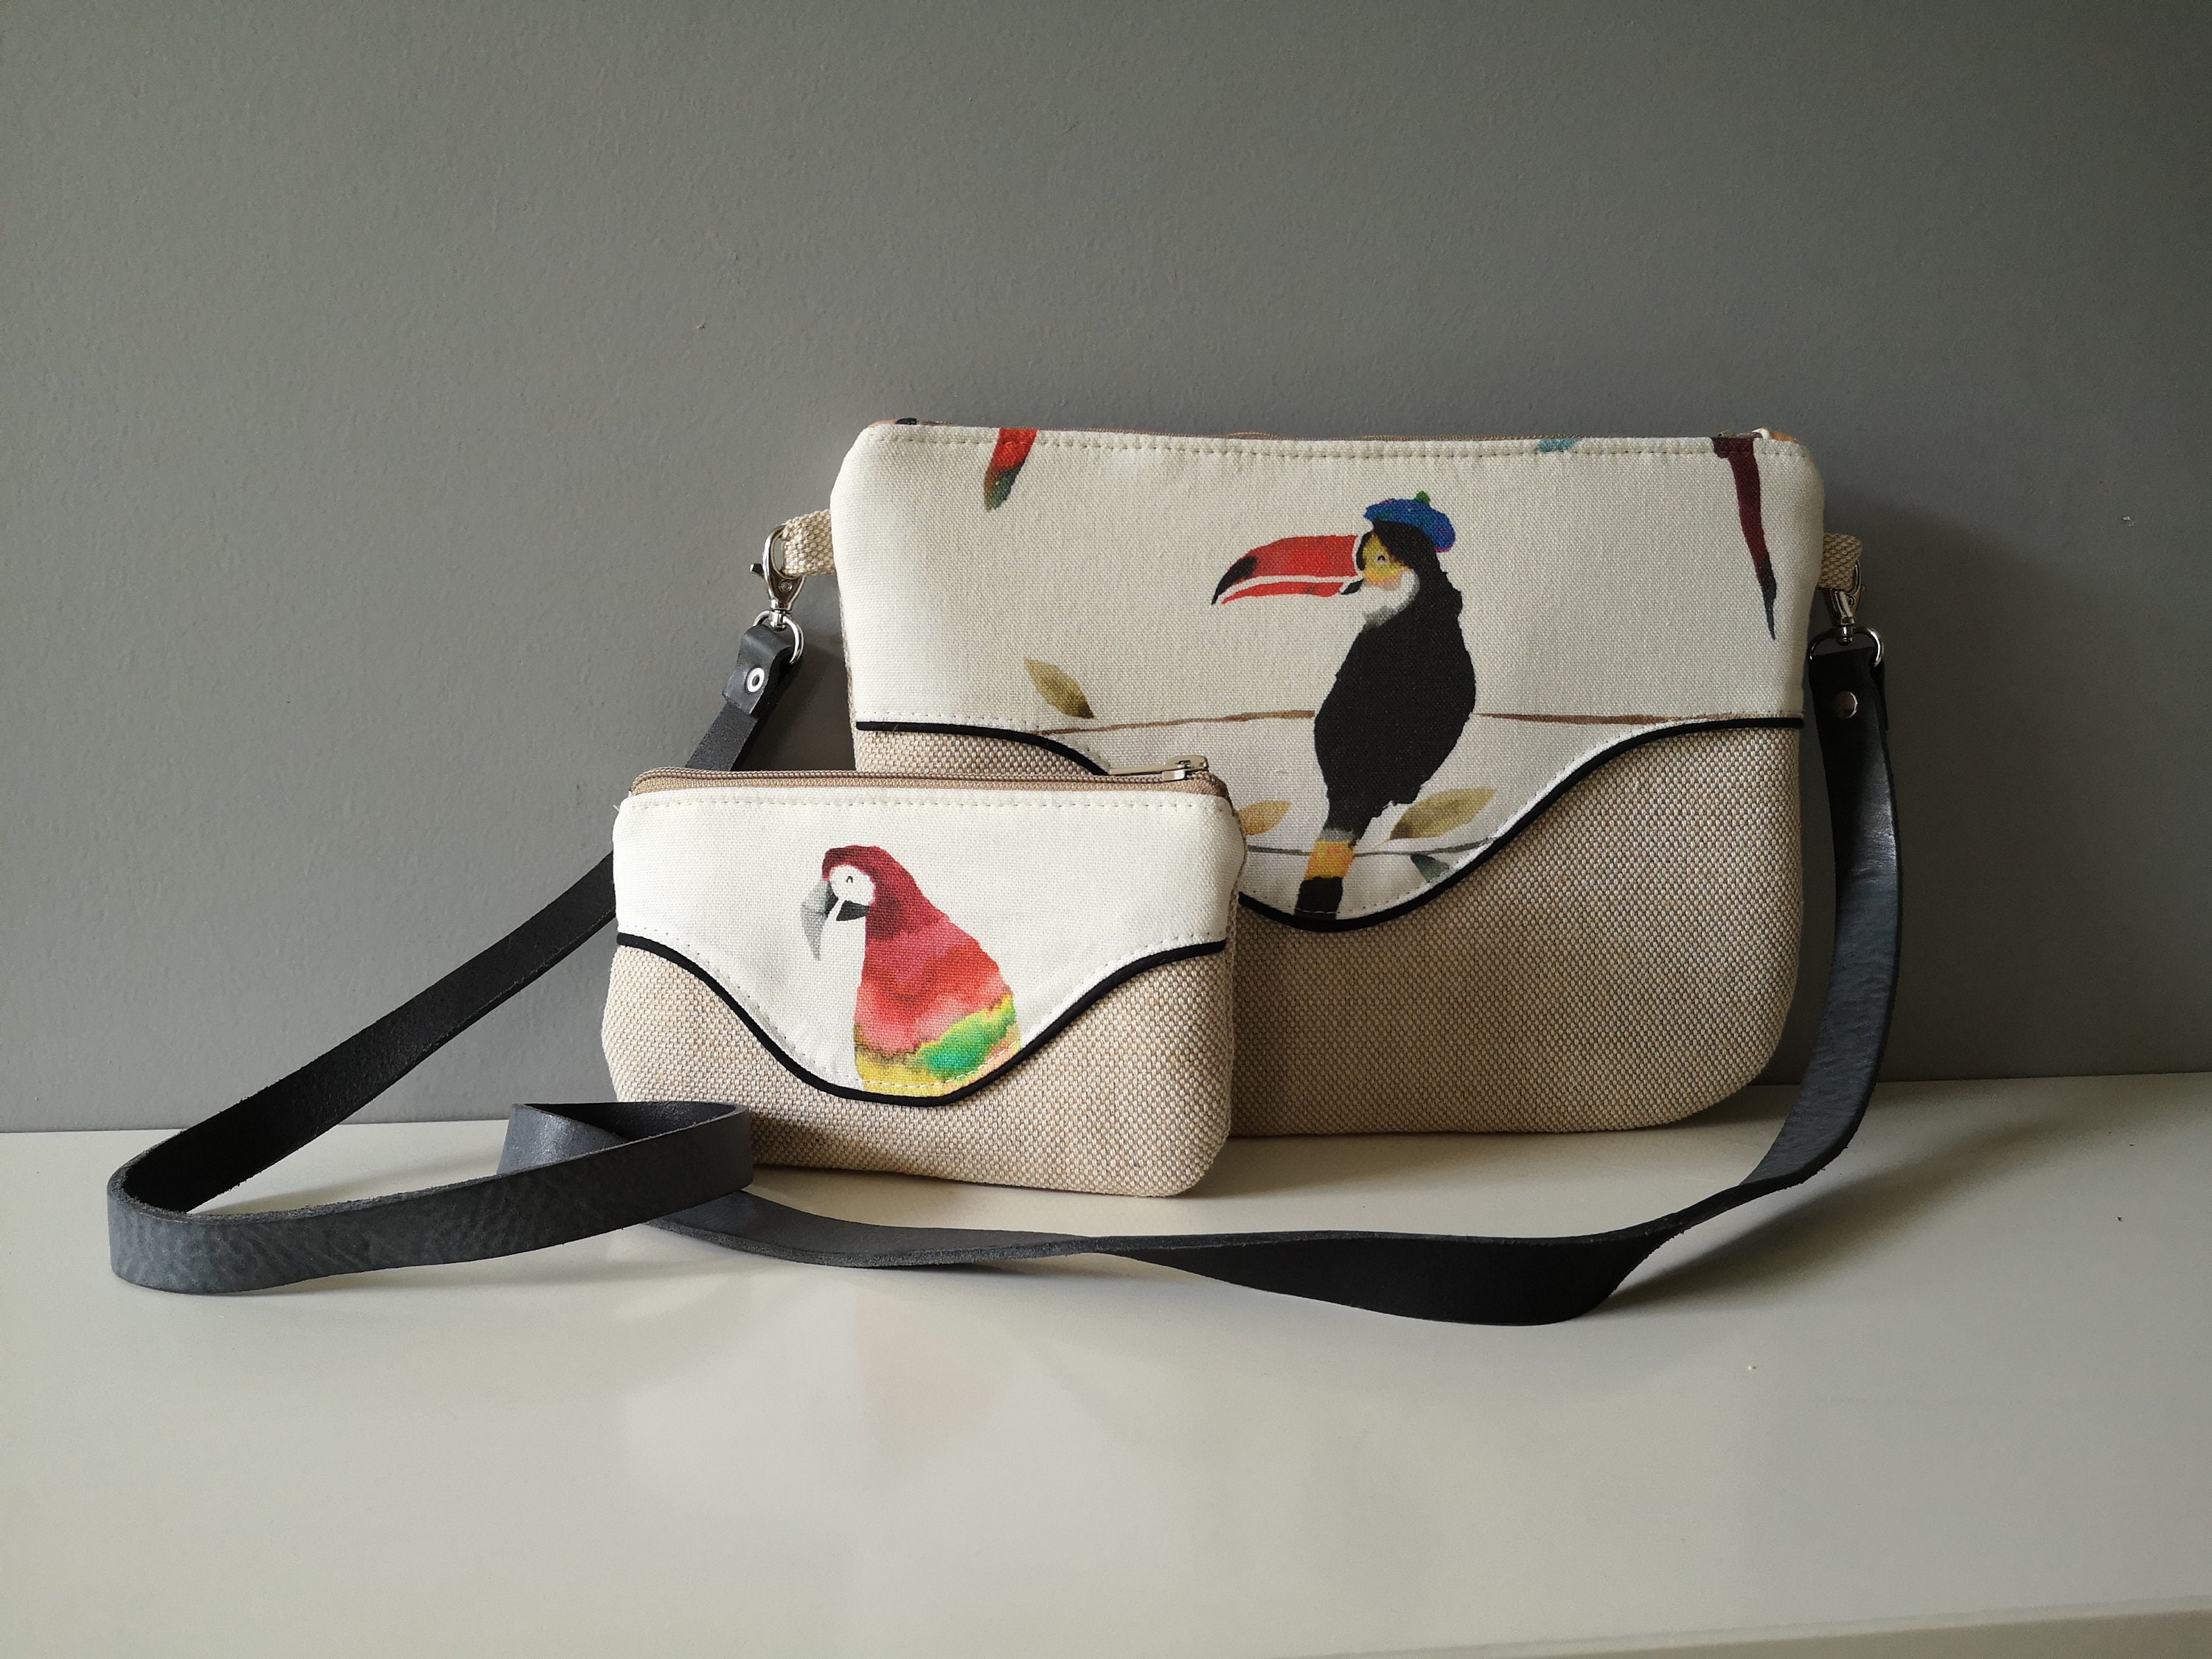 Women's Convertible Beach Towel Bag in Jungle Toucan by Grace and Lace